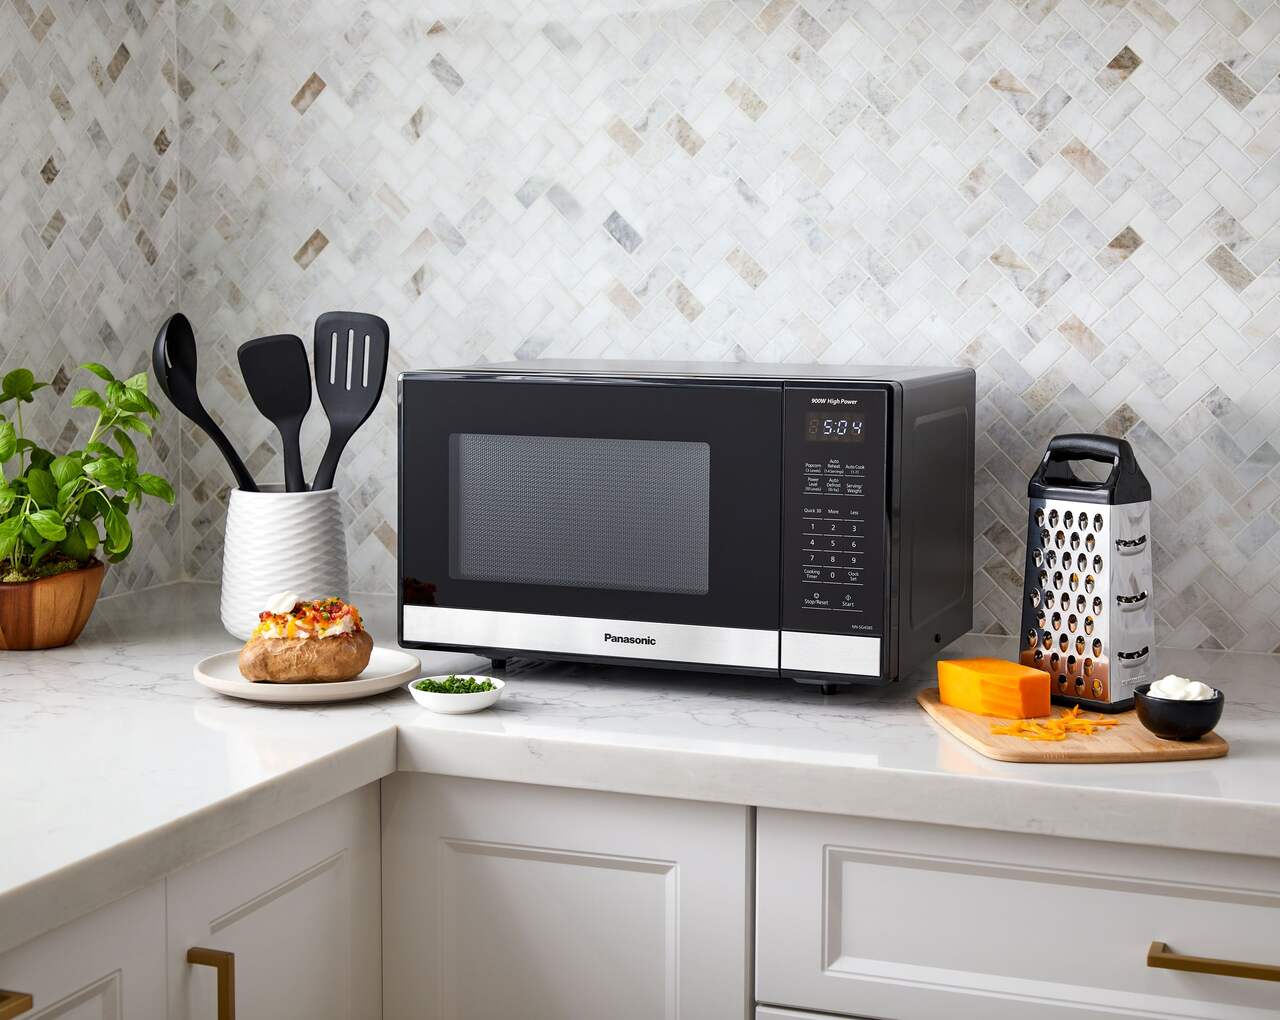 https://media-www.canadiantire.ca/product/living/kitchen/white-goods/0431024/panasonic-0-9cu-ft-microwave-black-and-stainless-steel-70c60c63-84c2-4600-9fb3-aa830f5811e5-jpgrendition.jpg?imdensity=1&imwidth=1244&impolicy=mZoom